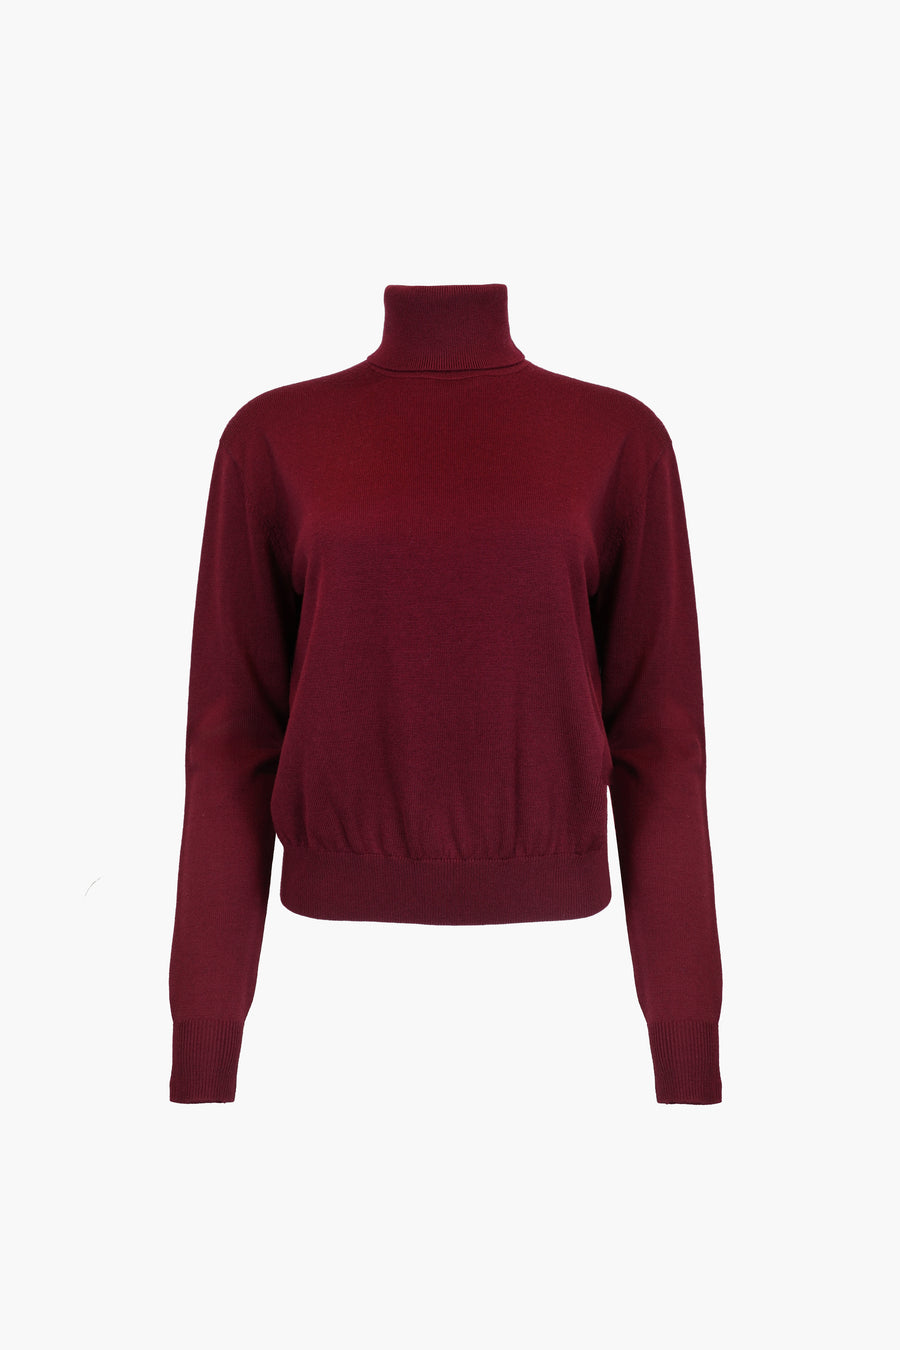 ANDO SWEATER IN CURRANT